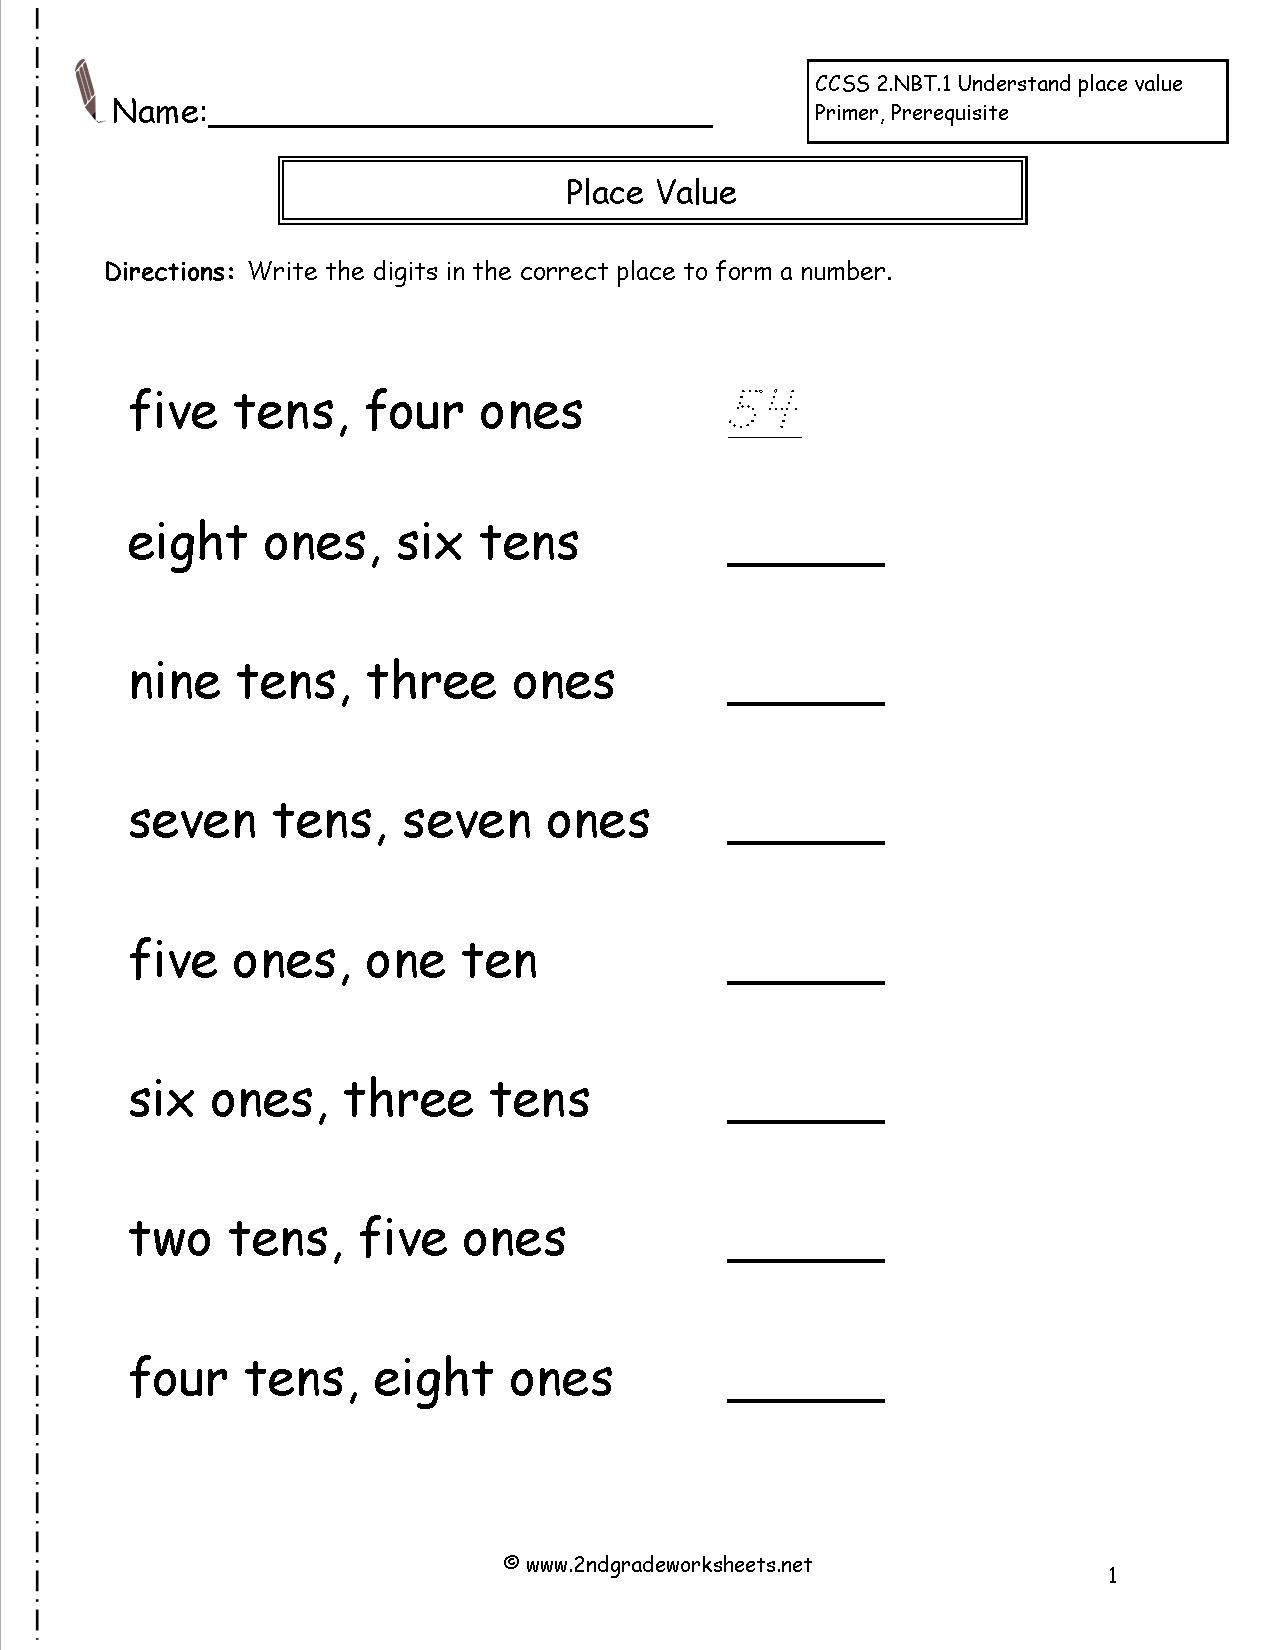 2nd-grade-place-value-worksheets-tens-and-ones-tens-ones-grouping-worksheets-worksheet-grade